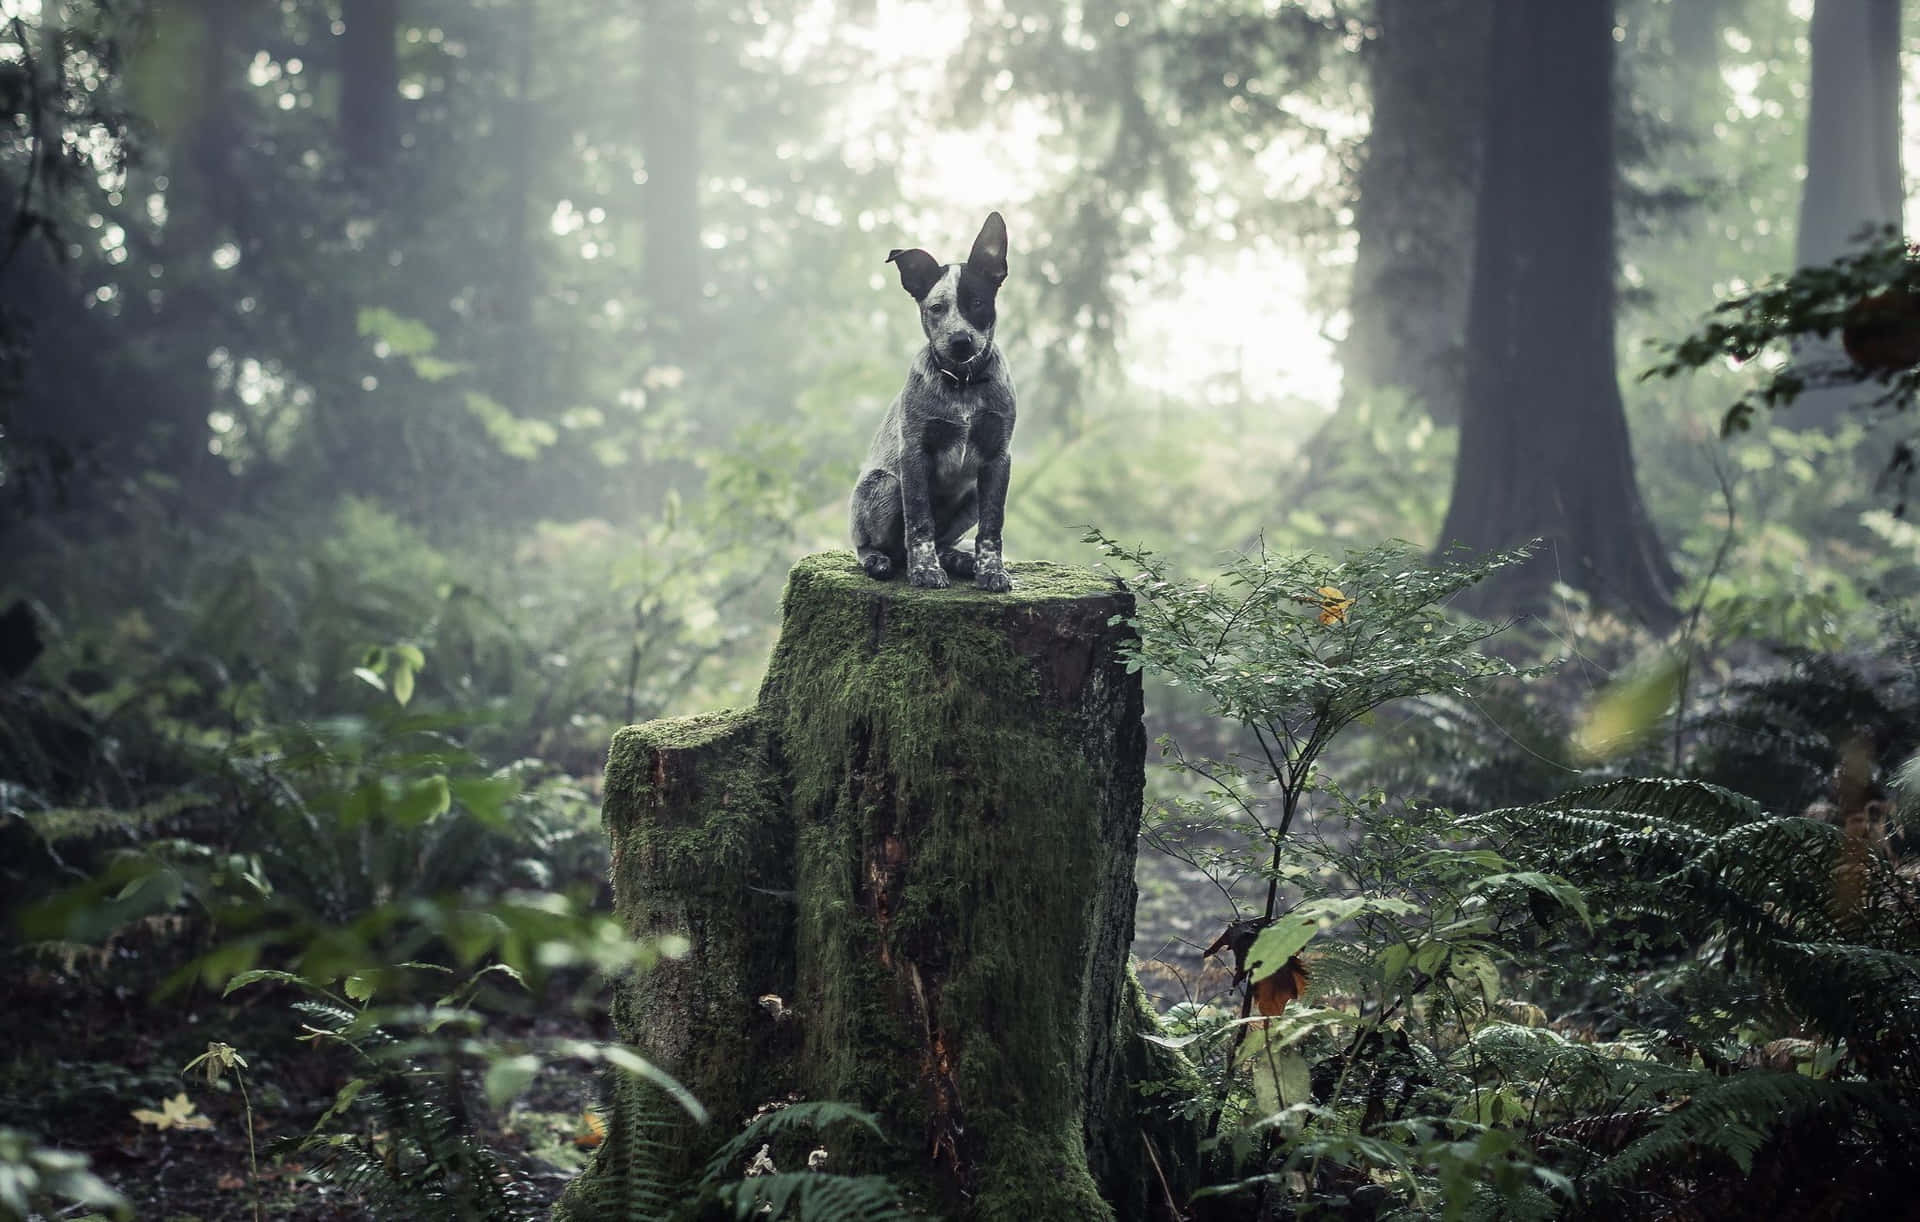 A Dog Sitting On Top Of A Tree Stump In The Forest